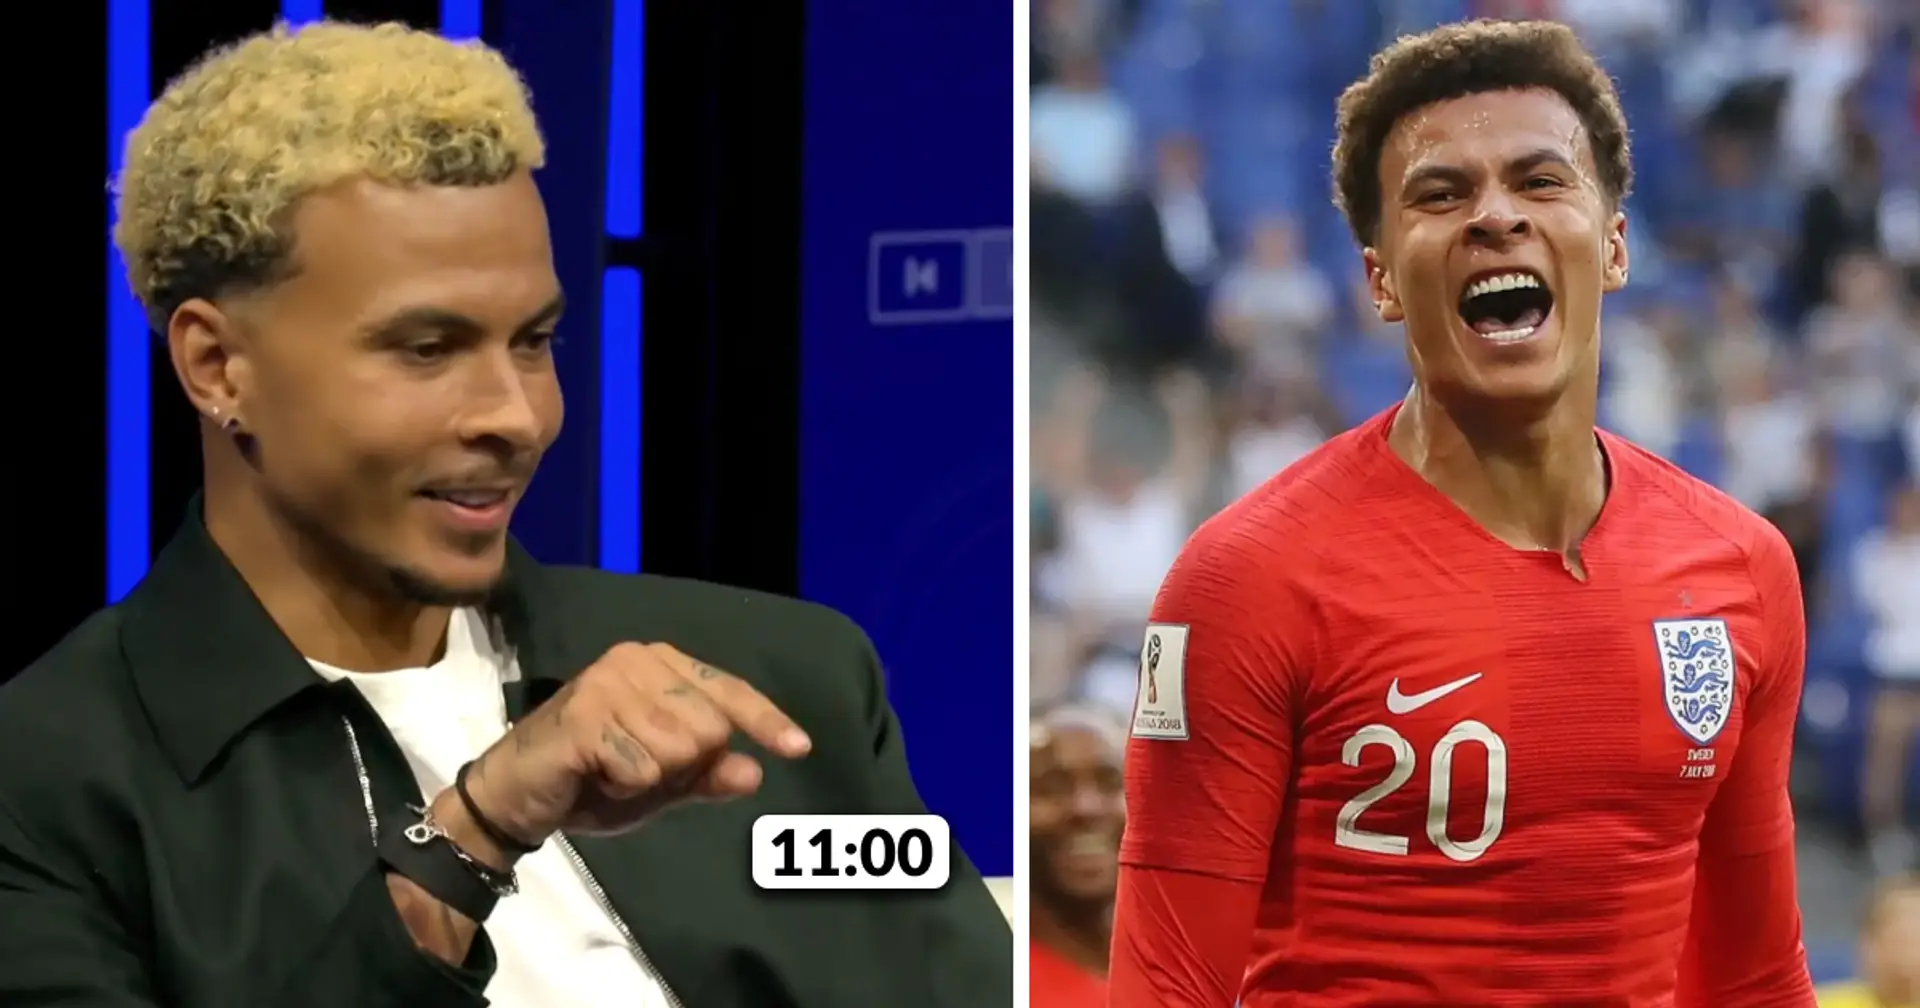 '11 o'clock every day': Dele Alli reveals one thing that motivates him daily 